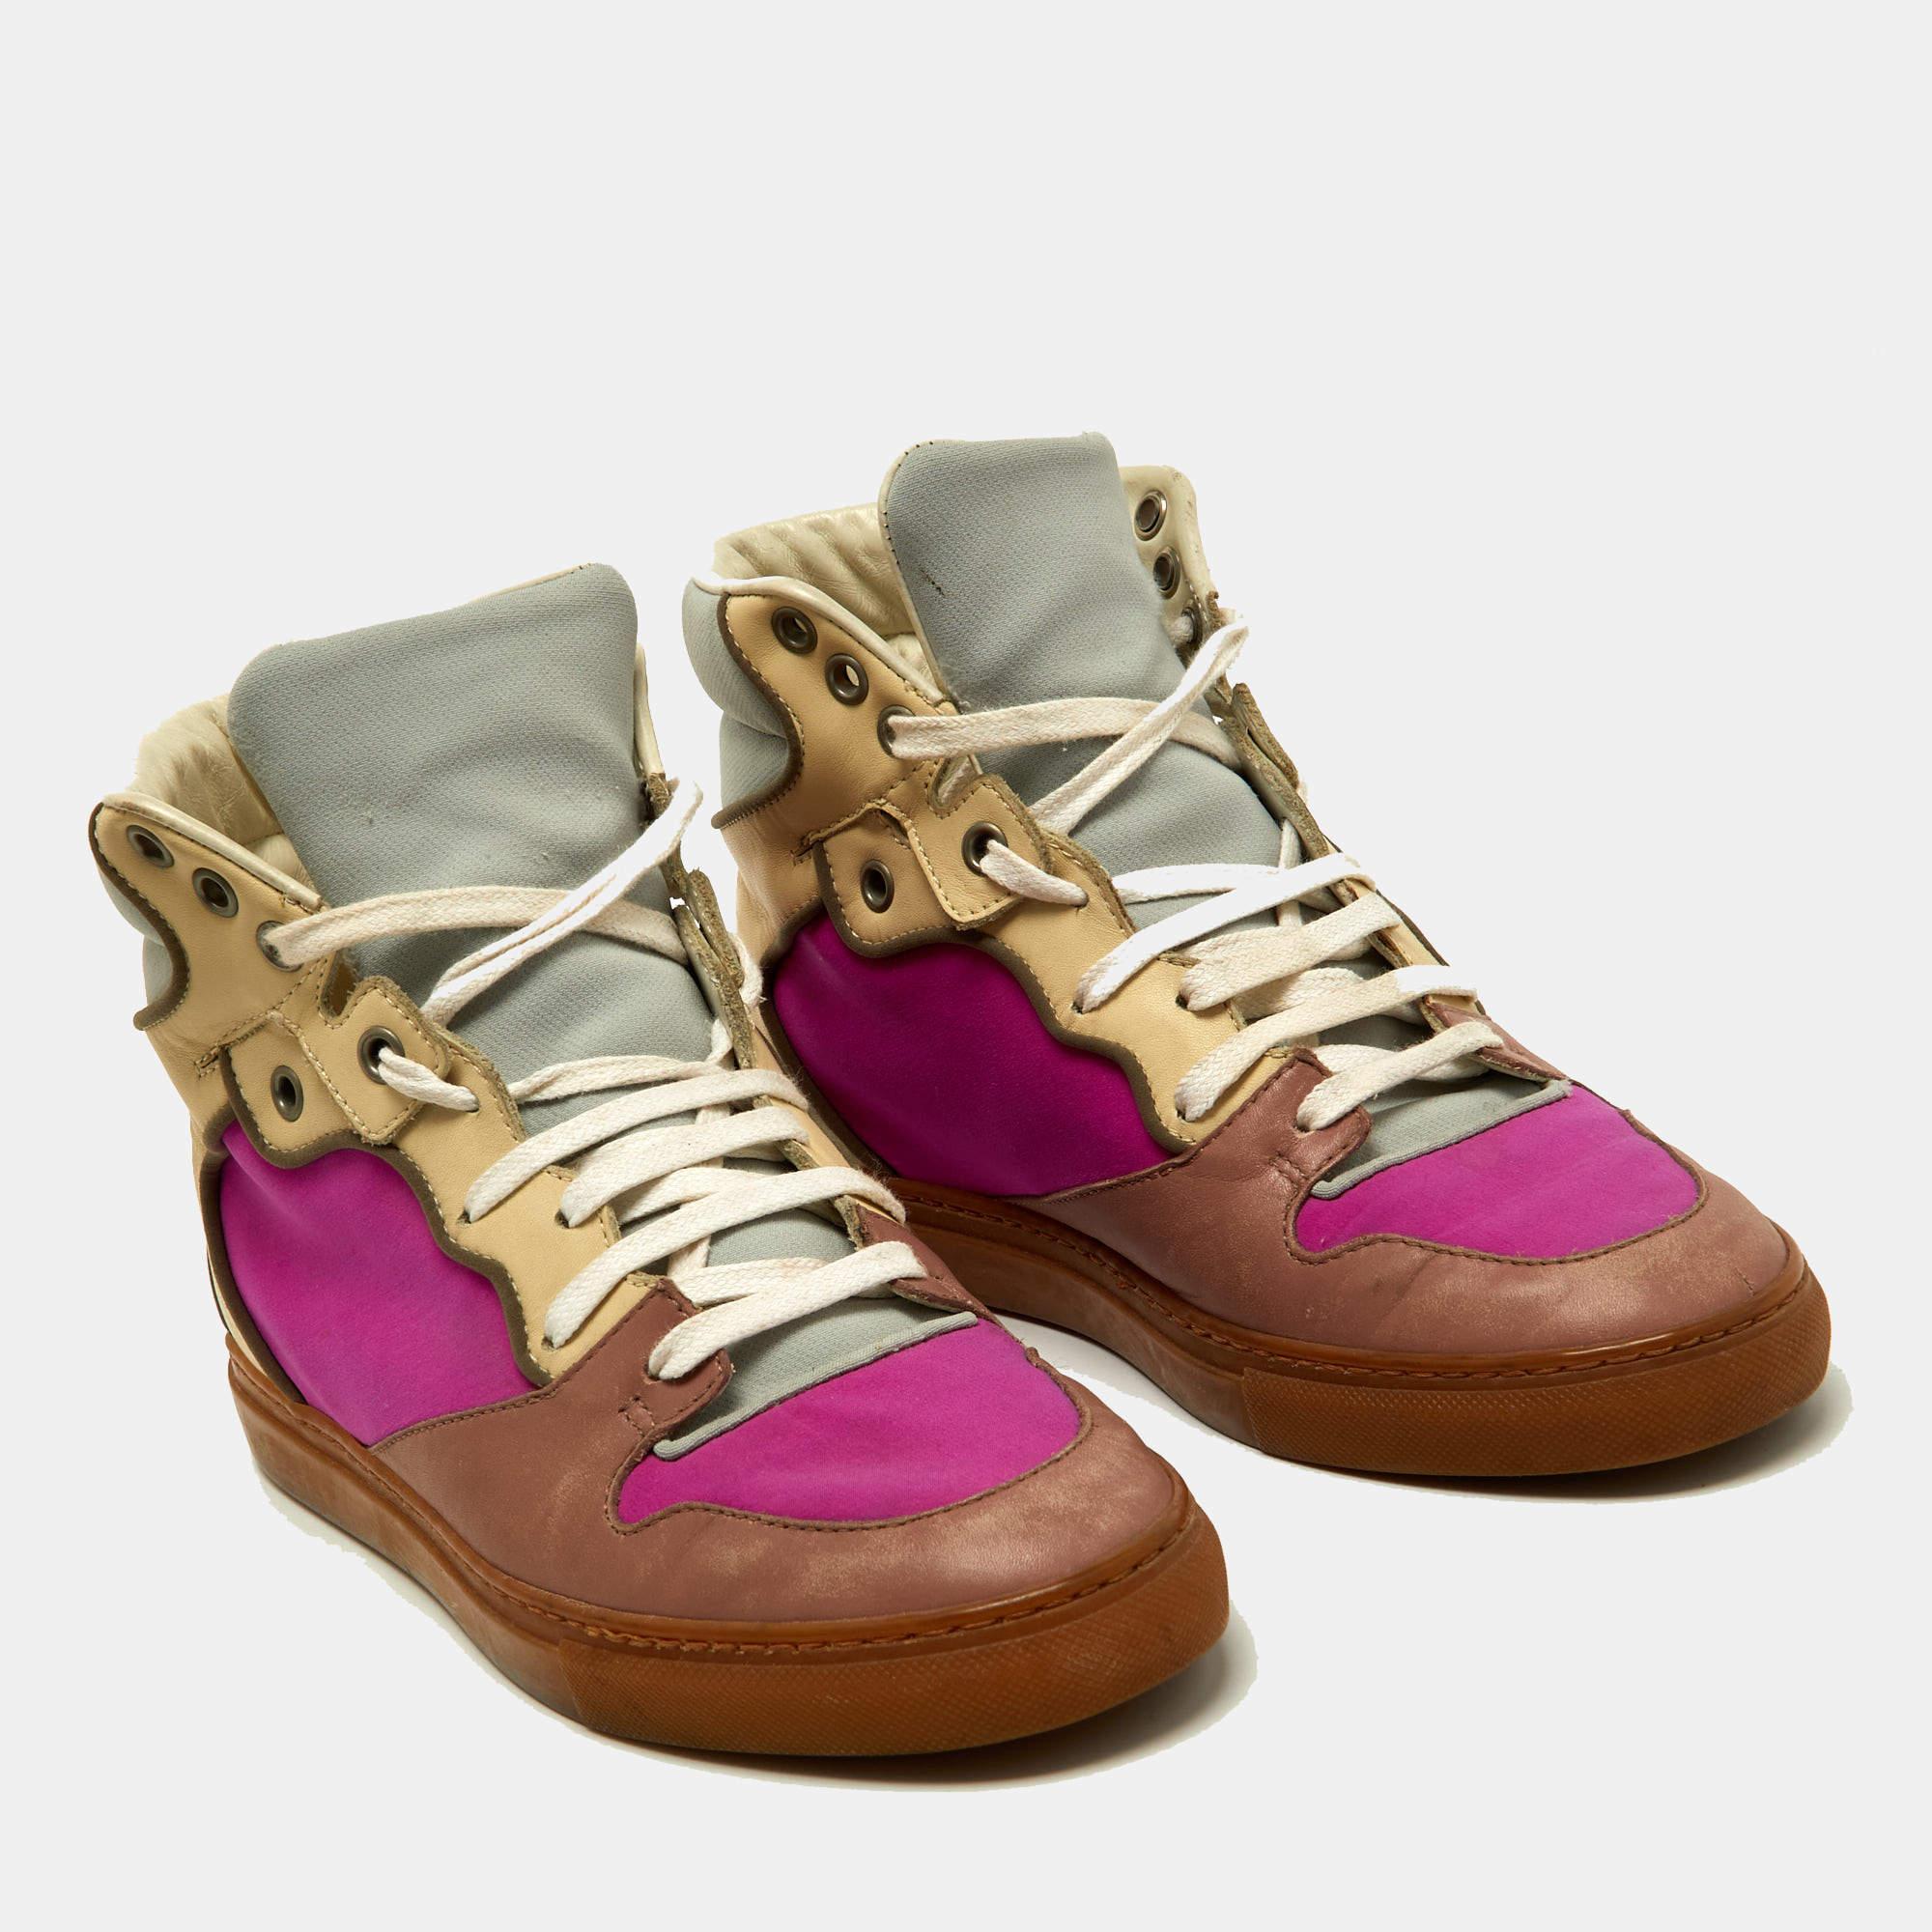 Balenciaga Multicolor Leather And Fabric High Top Sneakers Size 37 For Sale 3